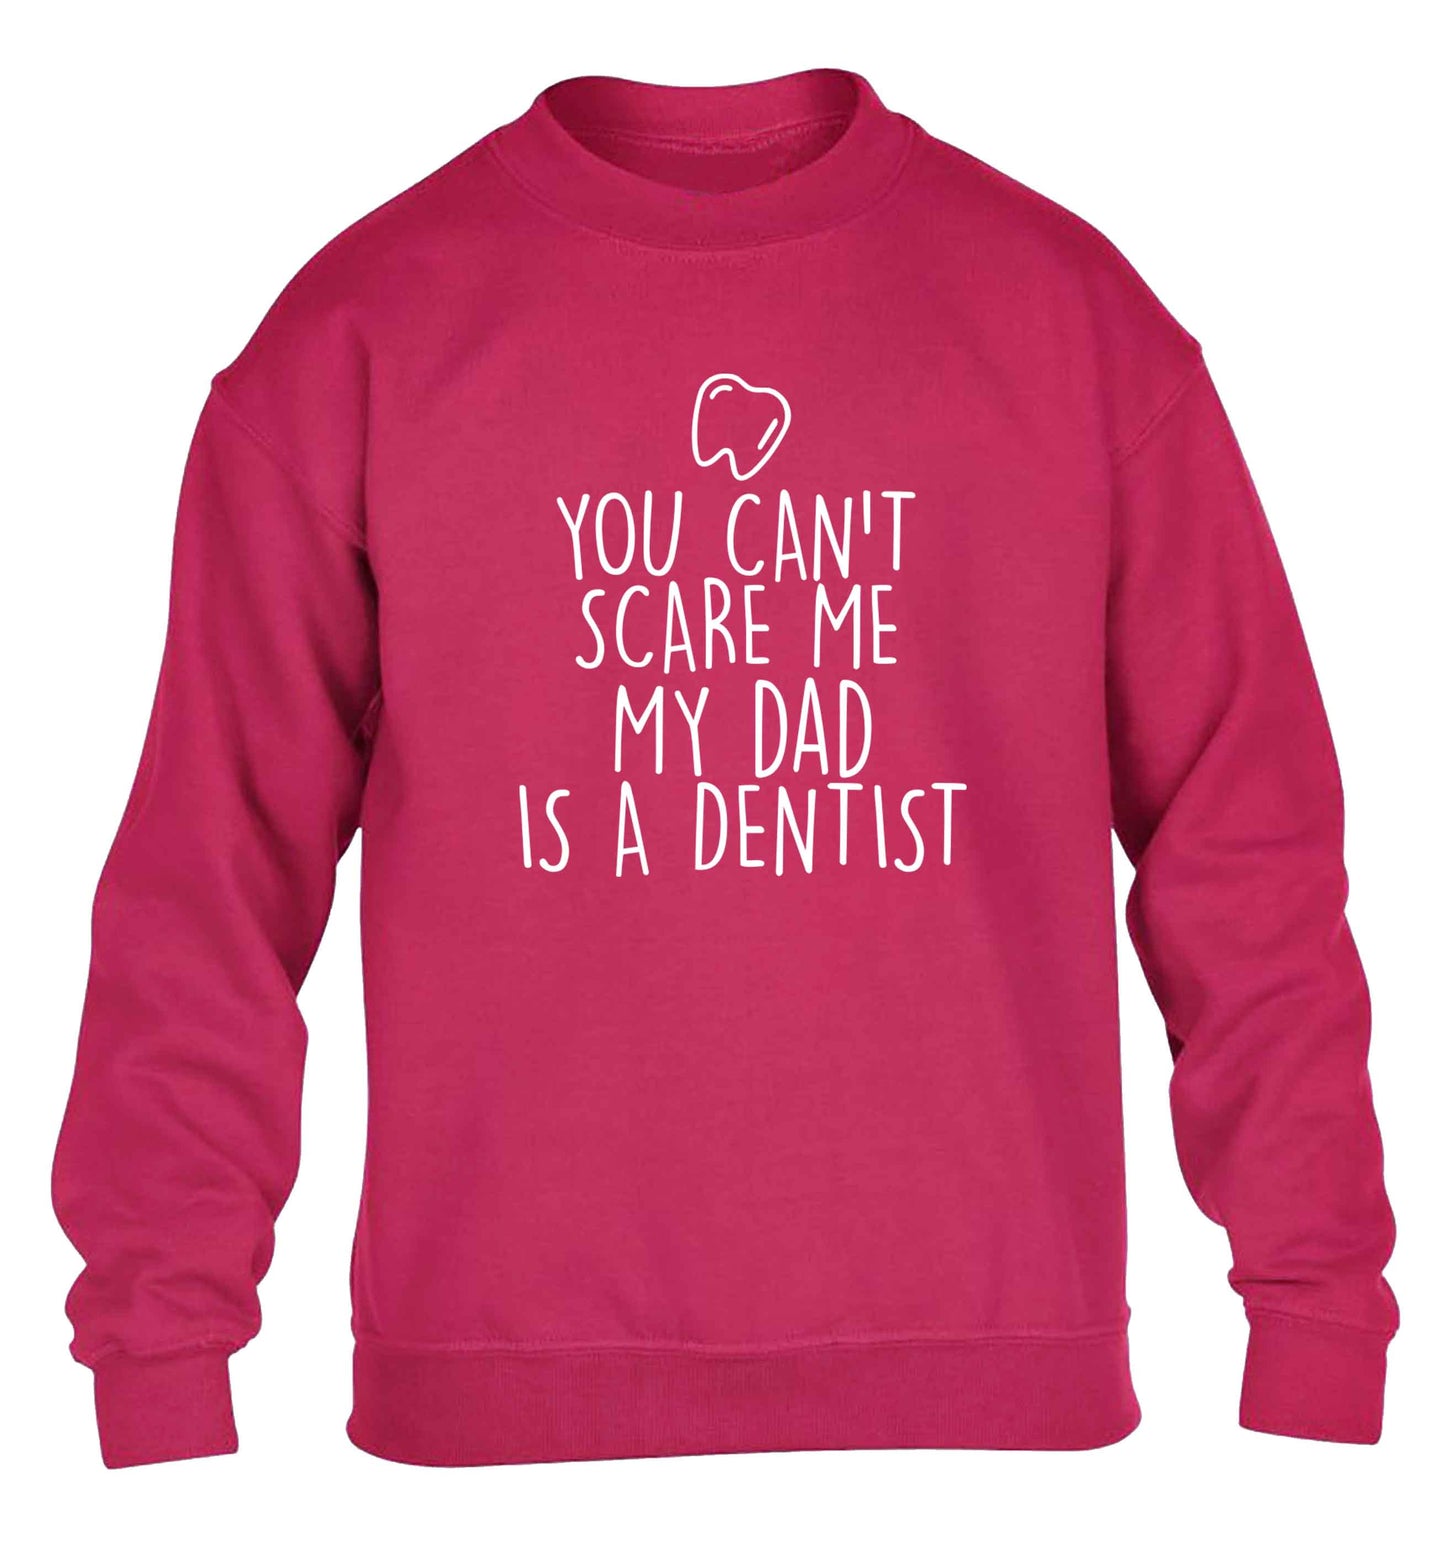 You can't scare me my dad is a dentist children's pink sweater 12-13 Years